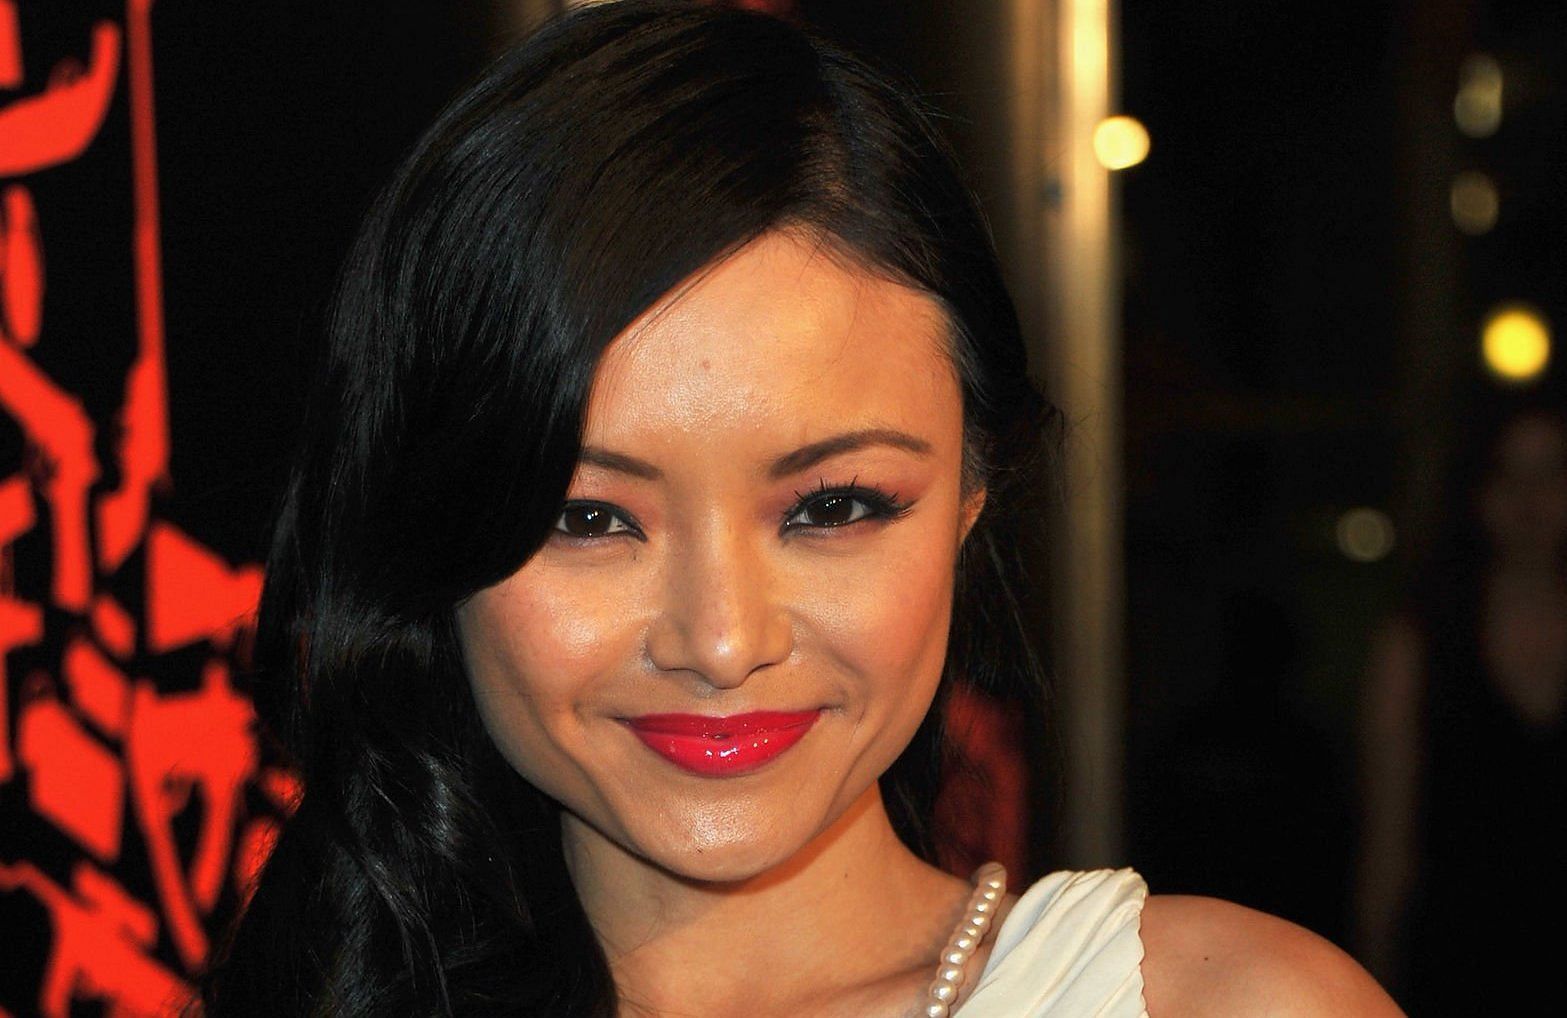 Tila Tequila rose to fame in the early 2000s, but had a downfall after several racist controversies (Image via Alberto E. Rodriguez/Getty Images)